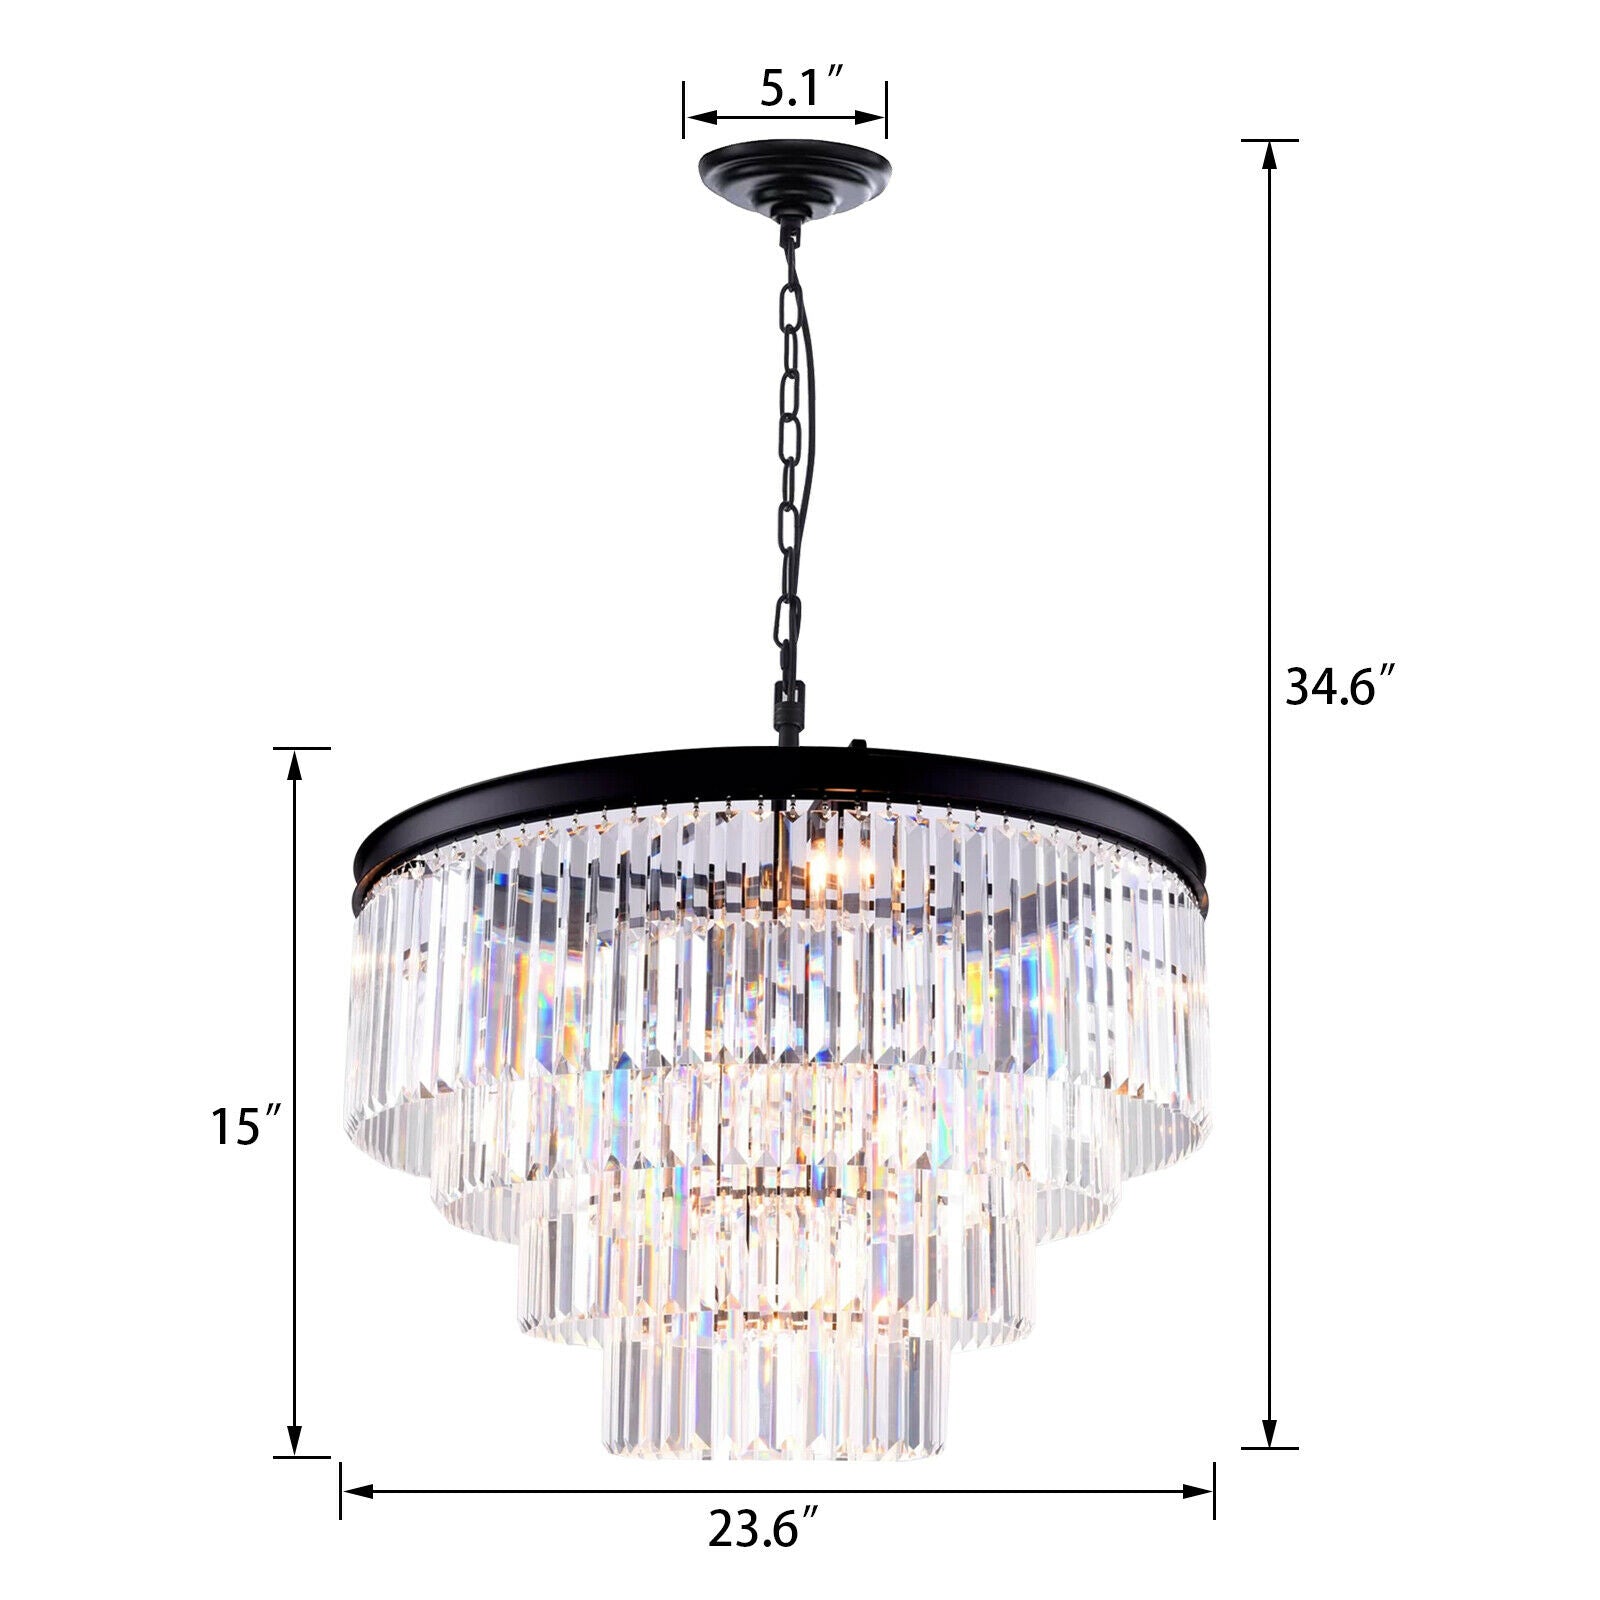 Size of Crystal Ceiling Light Chandelier 4 tier